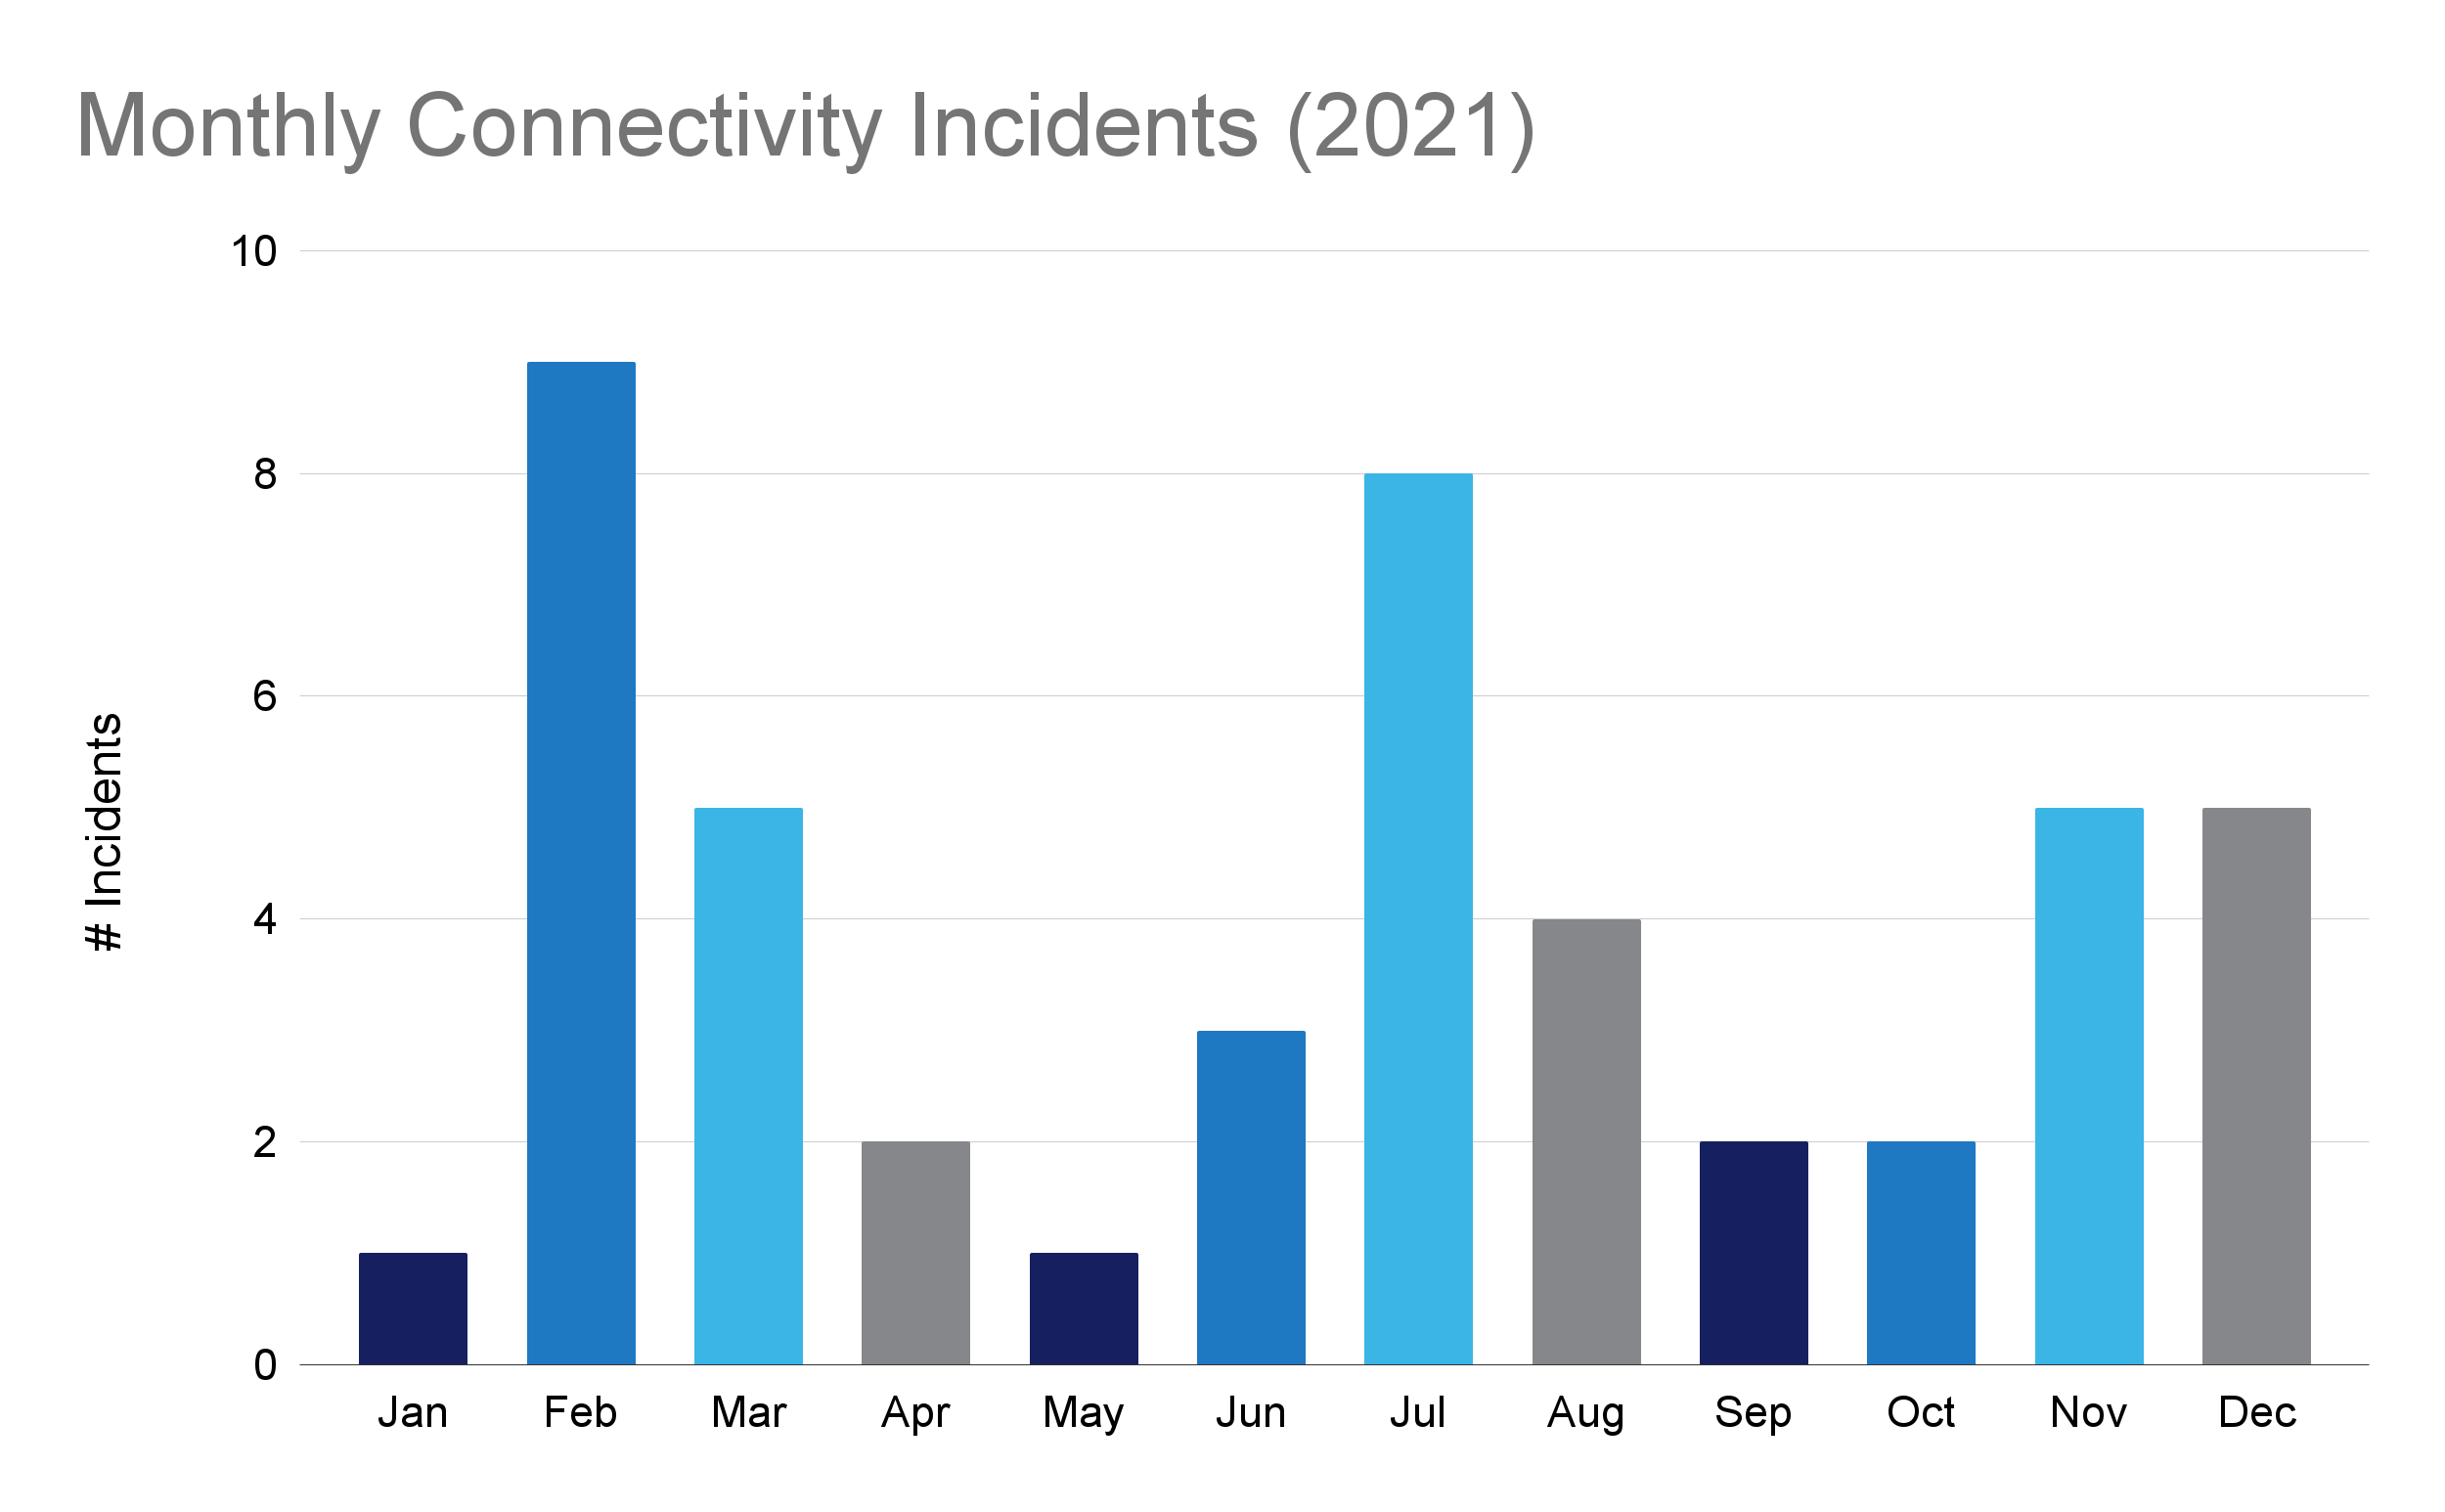 Monthly connectivity incidents